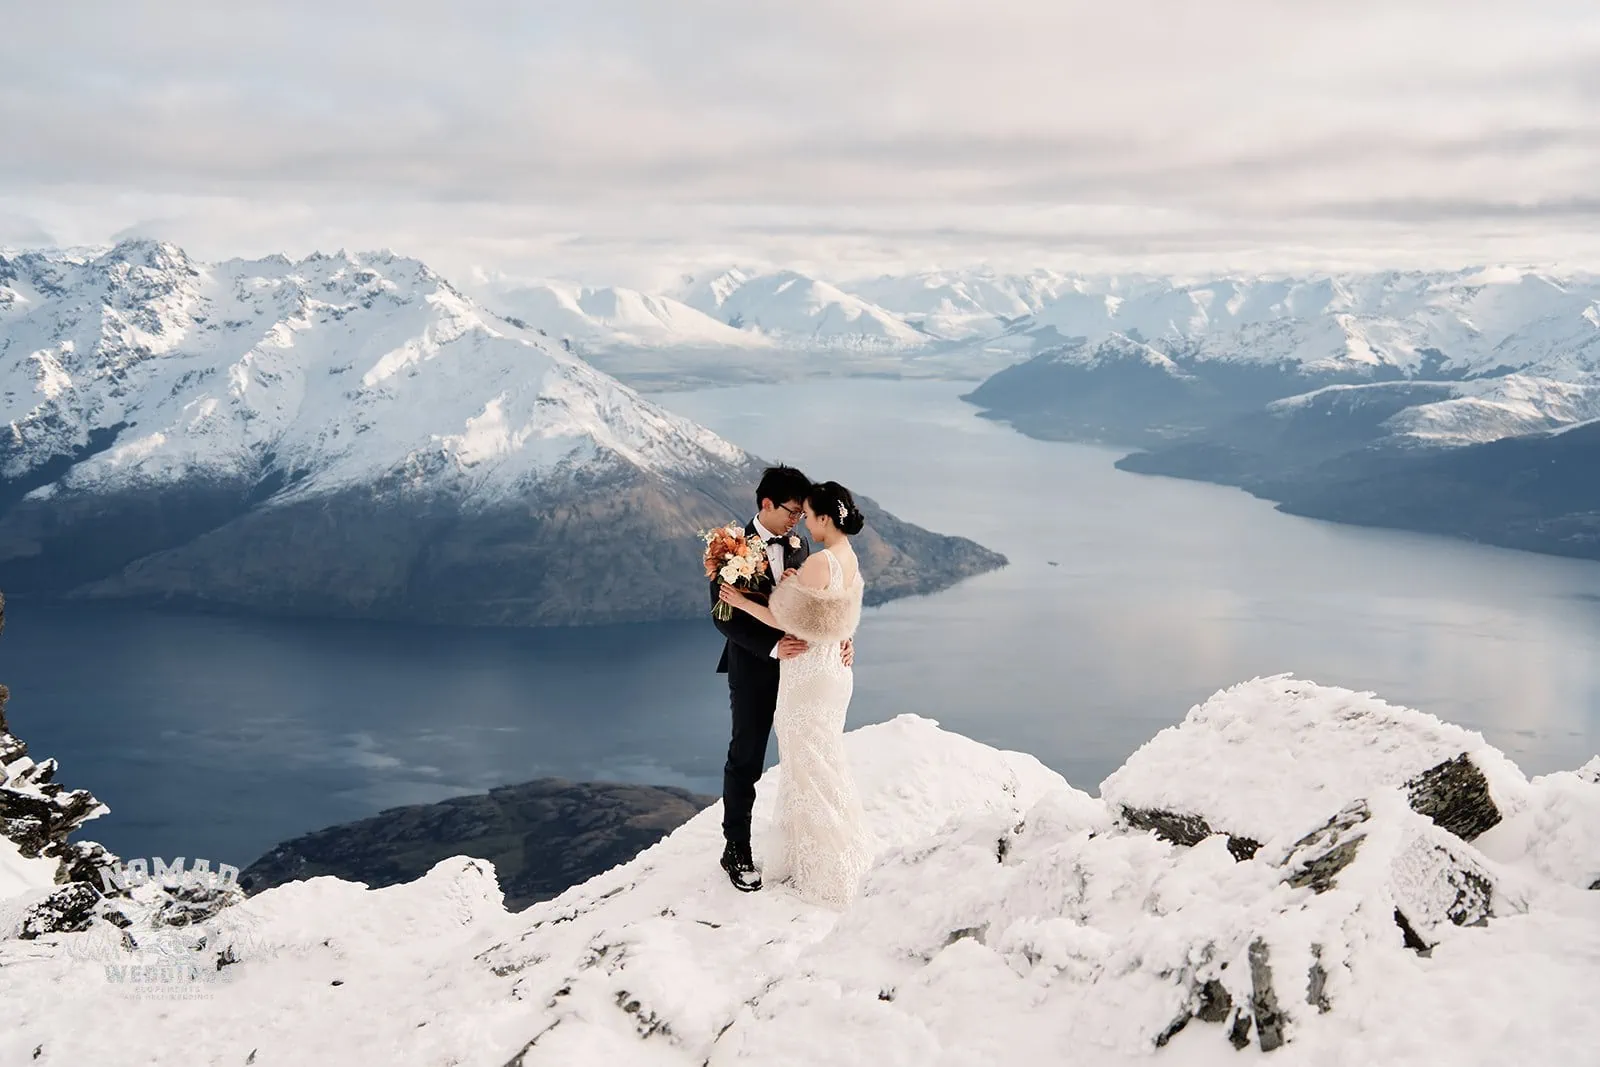 A pre-wedding shoot featuring Joanna and Tony on a snow covered mountain in Queenstown, New Zealand.